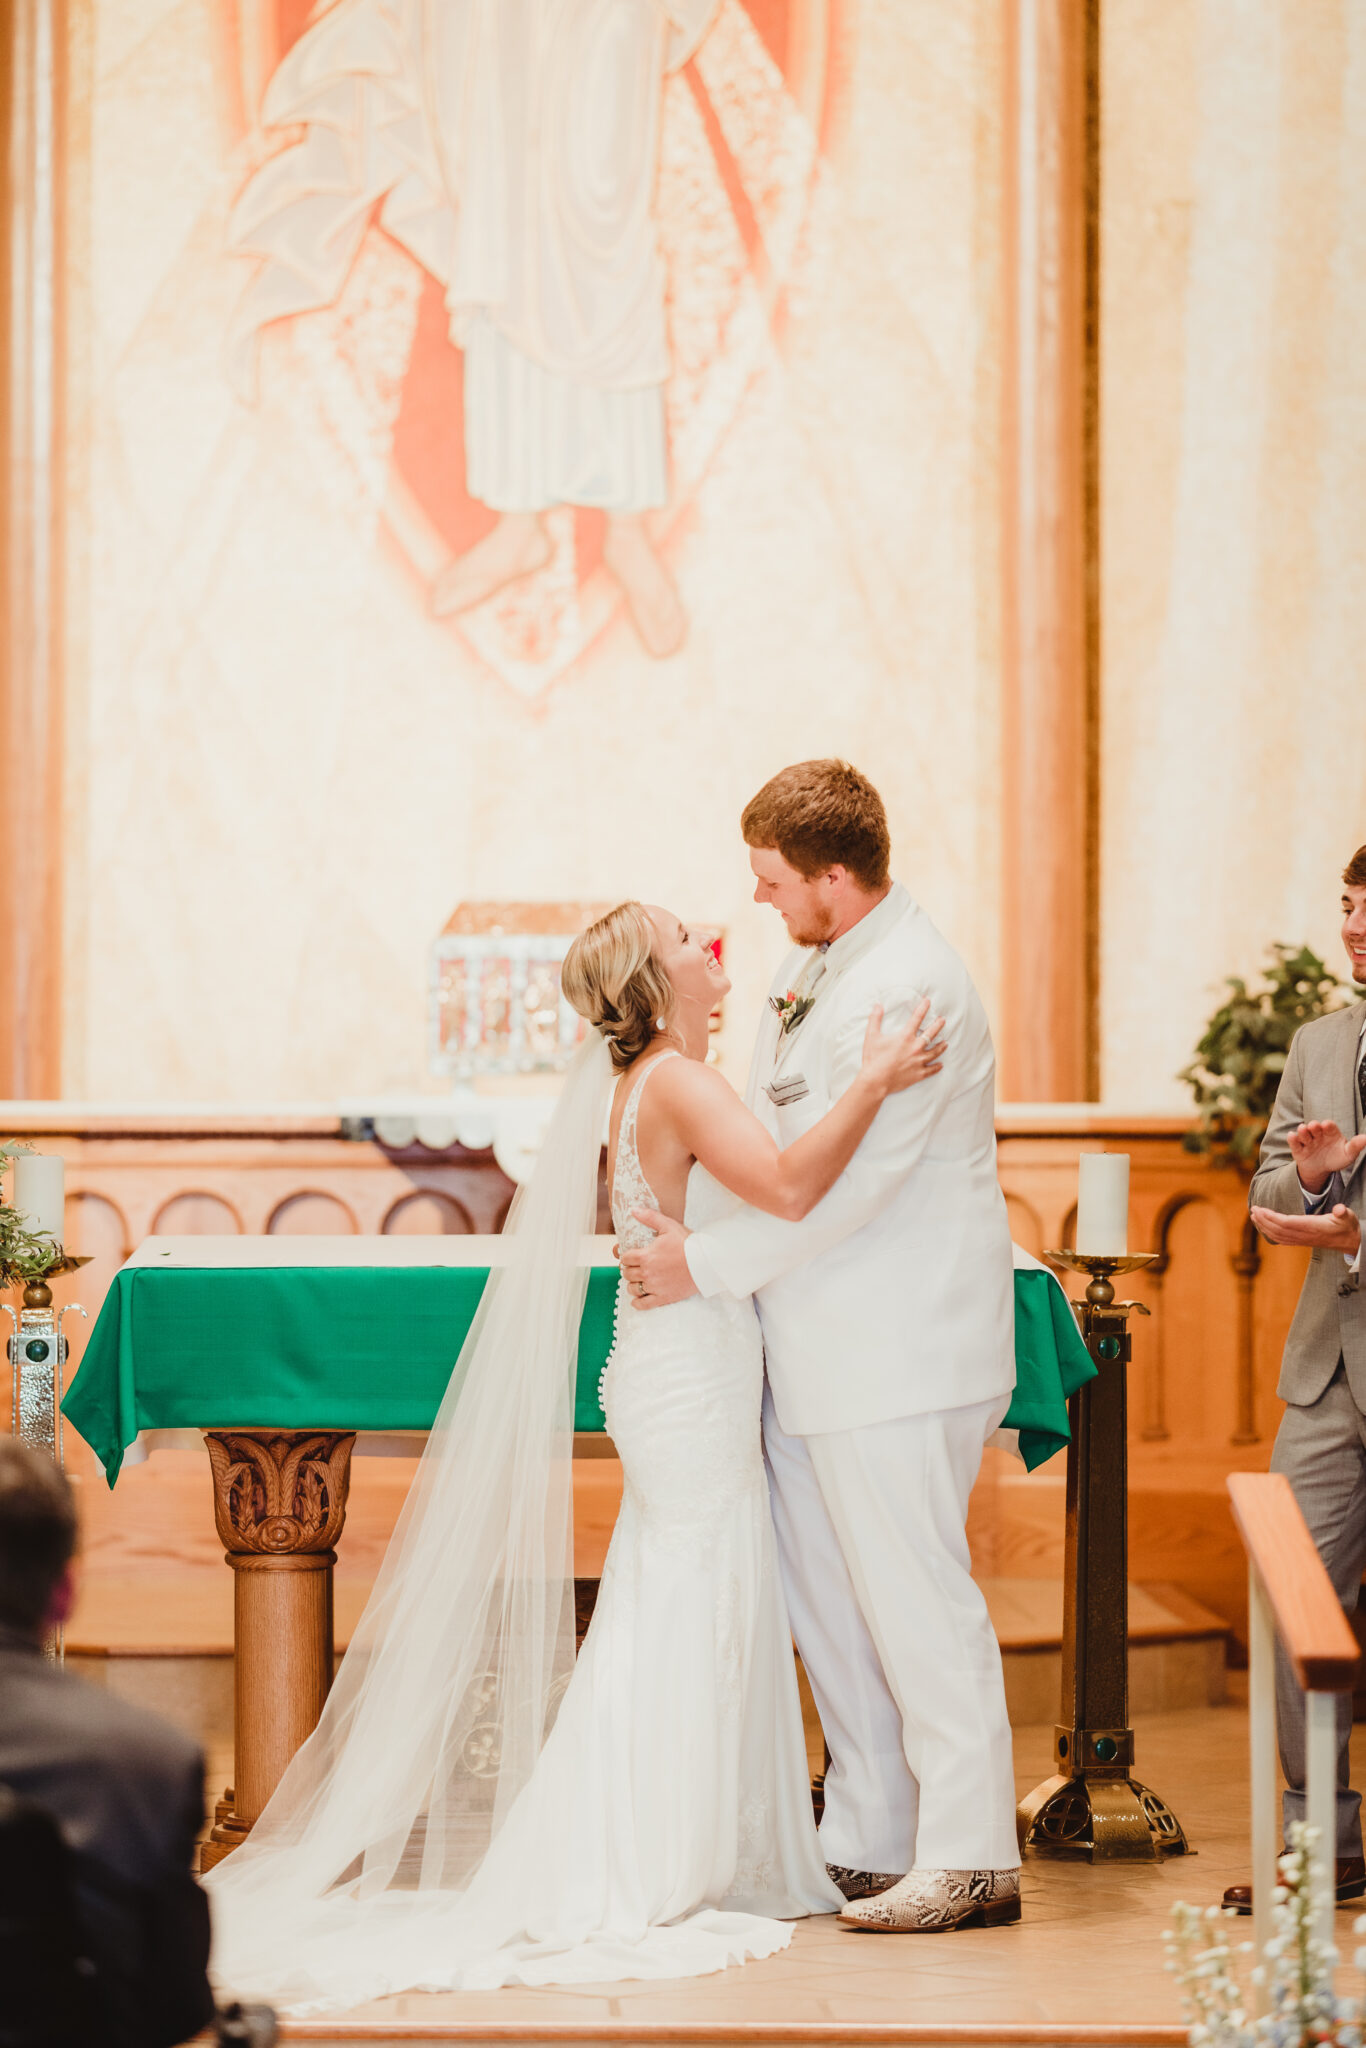 The bride and groom smile in front of their friends and family at the end of their Wisconsin church ceremony. Church wedding ceremony Wedding ceremony photos  #weddingplanning #weddingtimeline #diywedding #wisconsinweddingphotographer #wisconsinchurchwedding